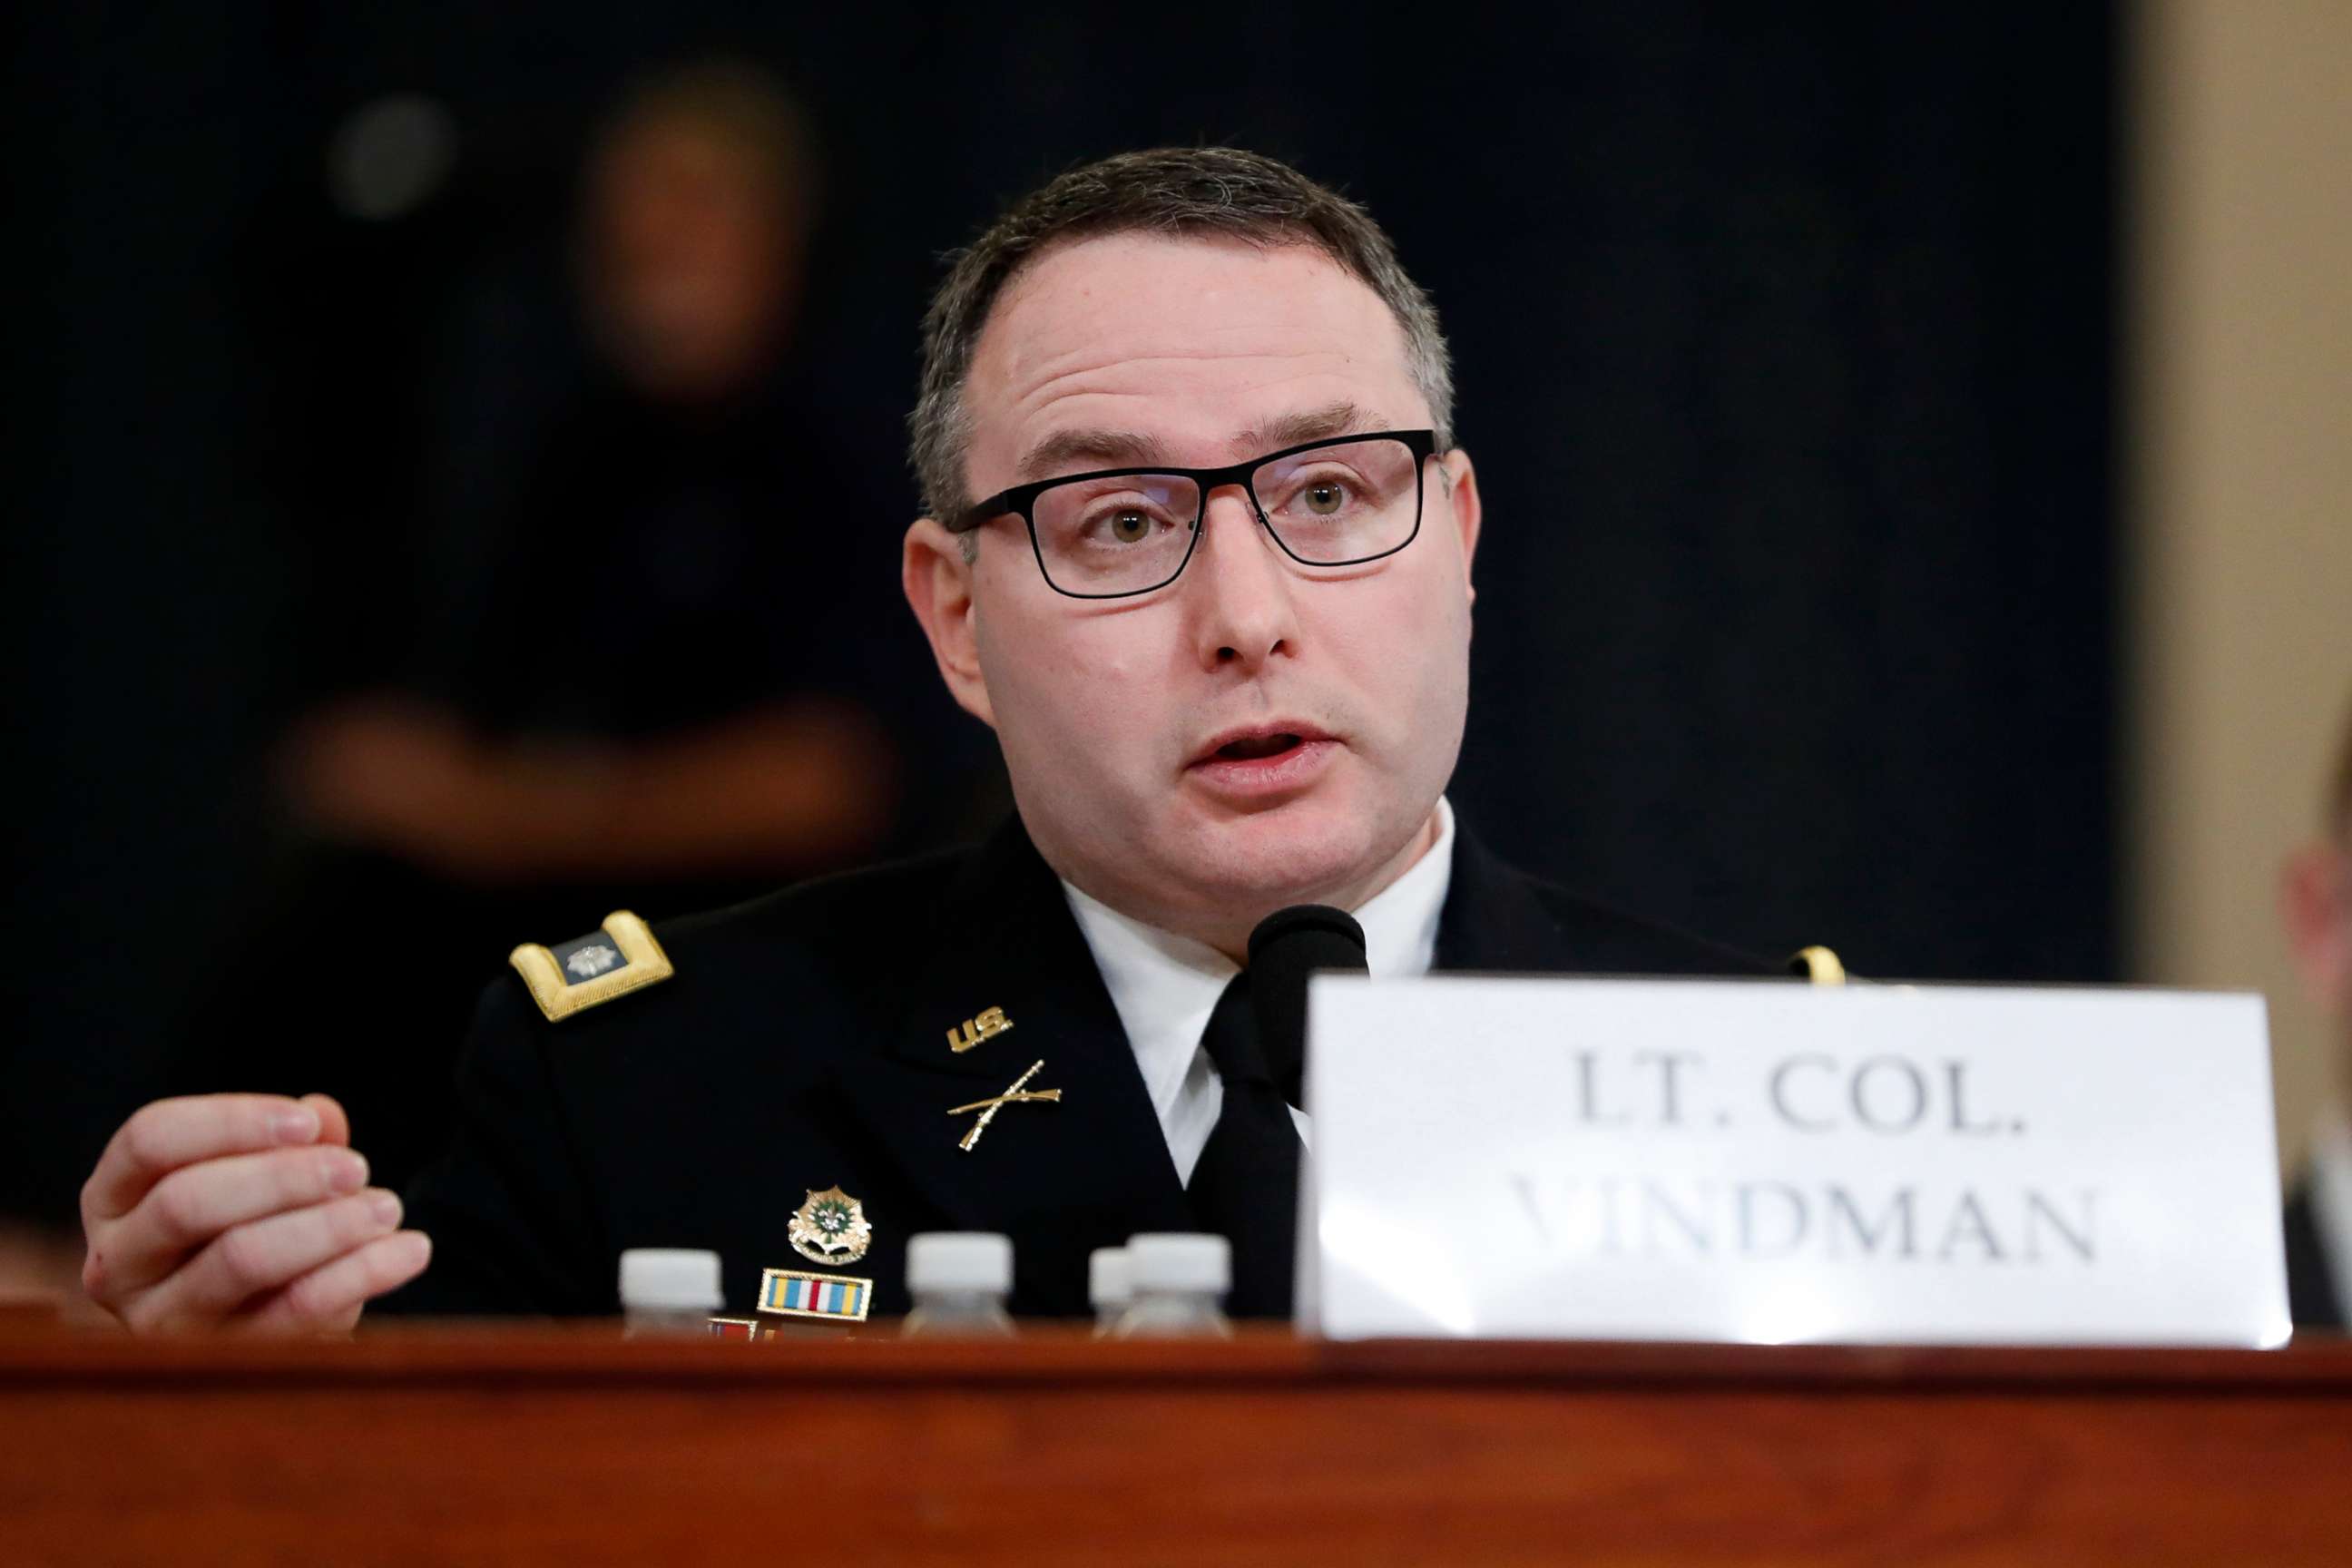 PHOTO: National Security Council aide Lt. Col. Alexander Vindman testifies before the House Intelligence Committee on Capitol Hill in Washington, D.C., Nov. 19, 2019.